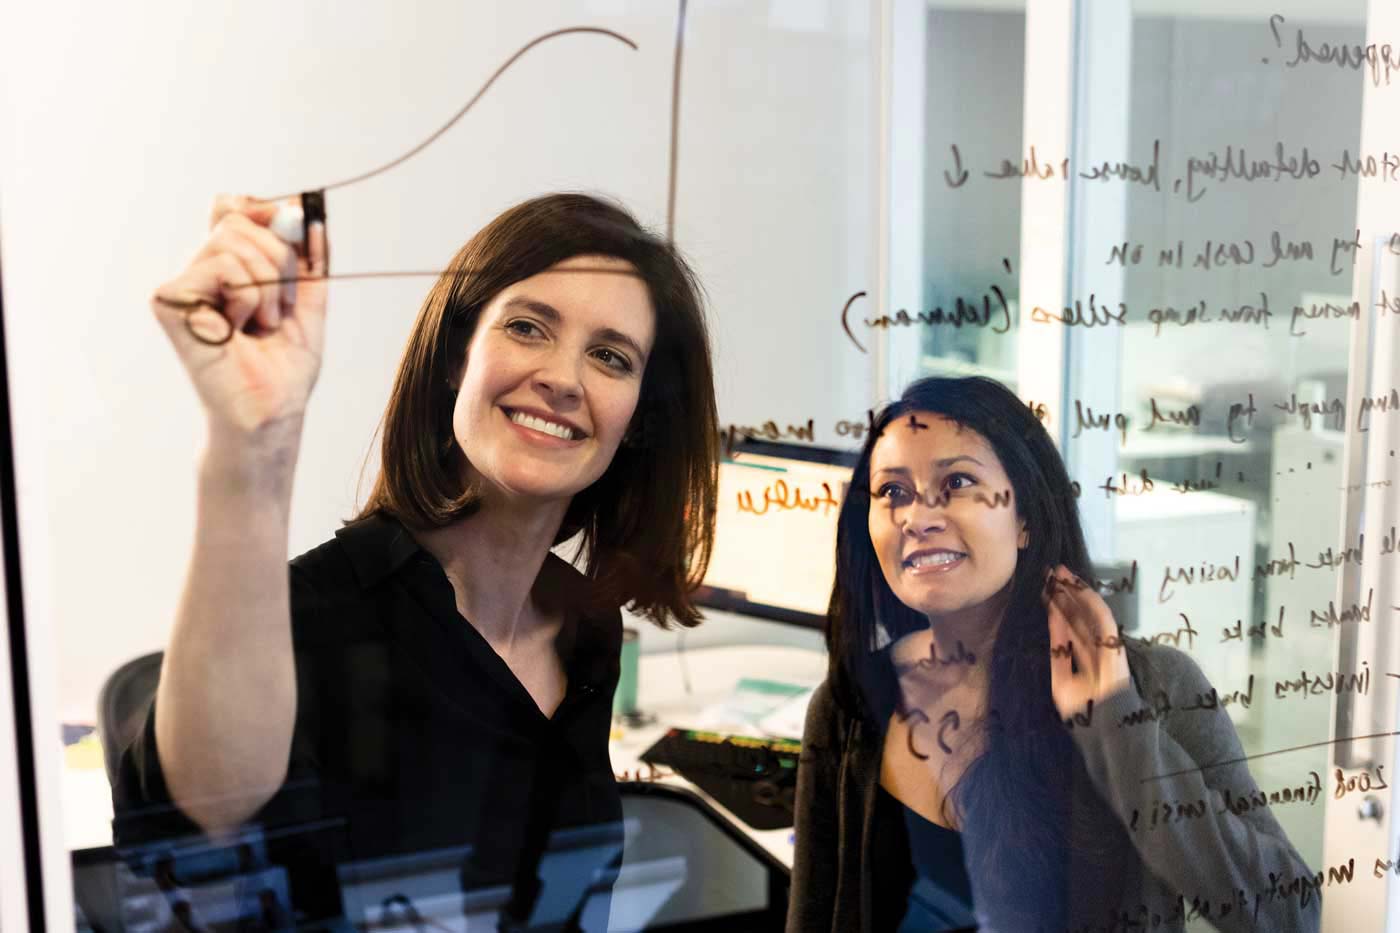 Woman writing on whiteboard mentoring a colleague.